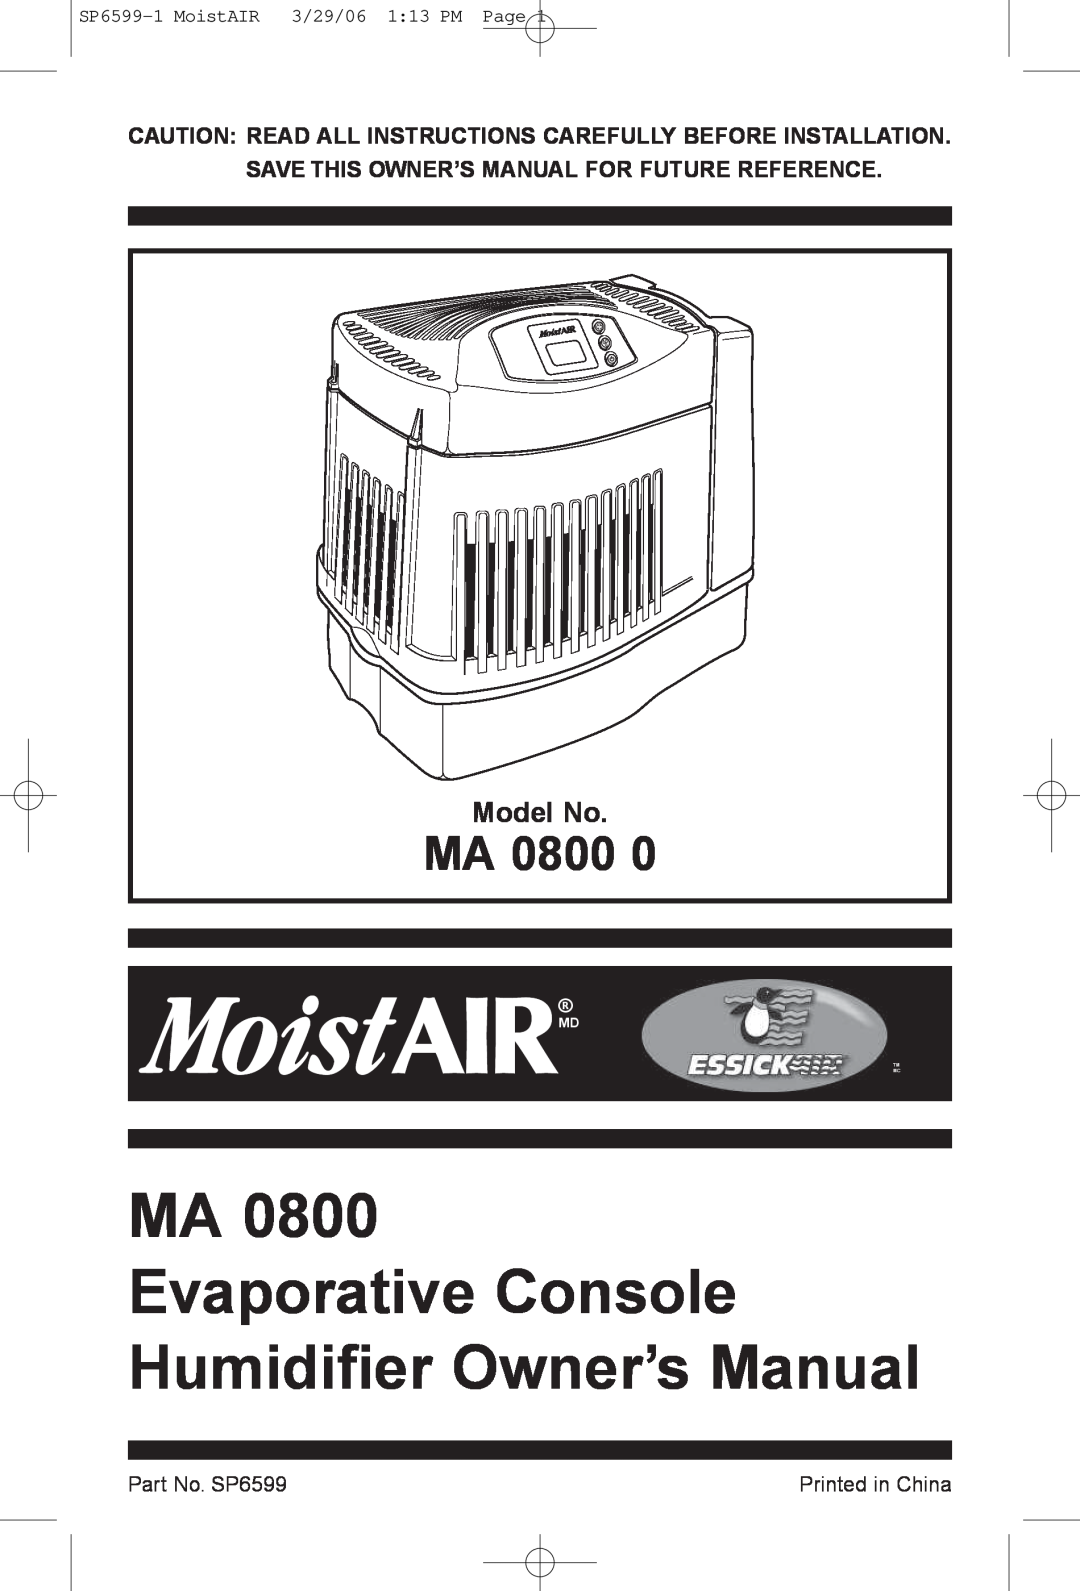 MoistAir MA 0800 0 owner manual Ma, Model No, Part No. SP6599, SP6599-1MoistAIR 3/29/06 1 13 PM Page, Tm Mc 